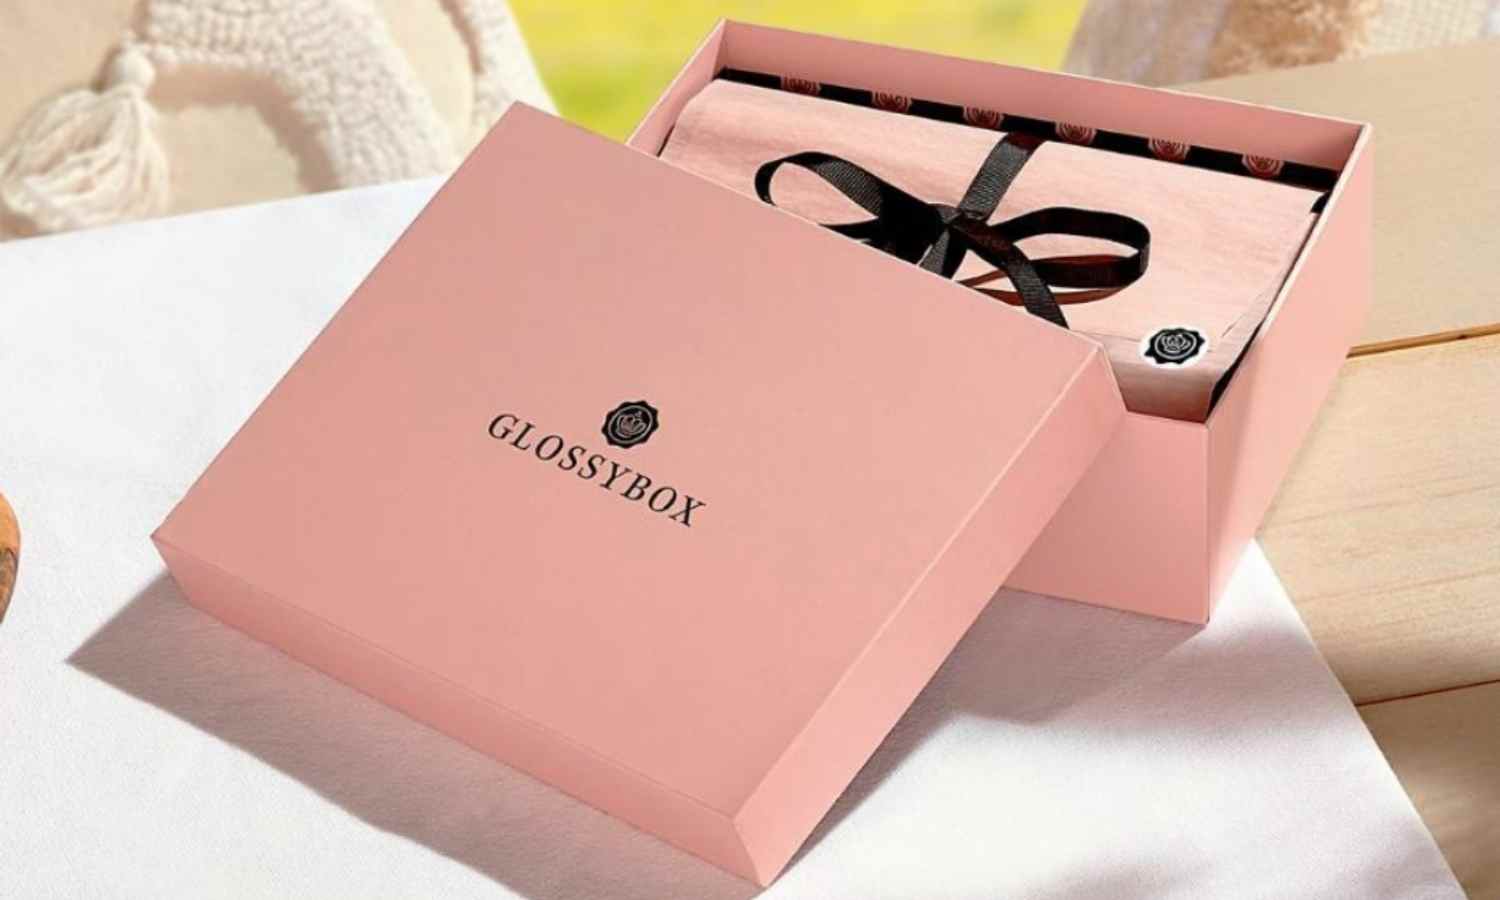 Glossybox Review: Are They As Glossy As They Seem?